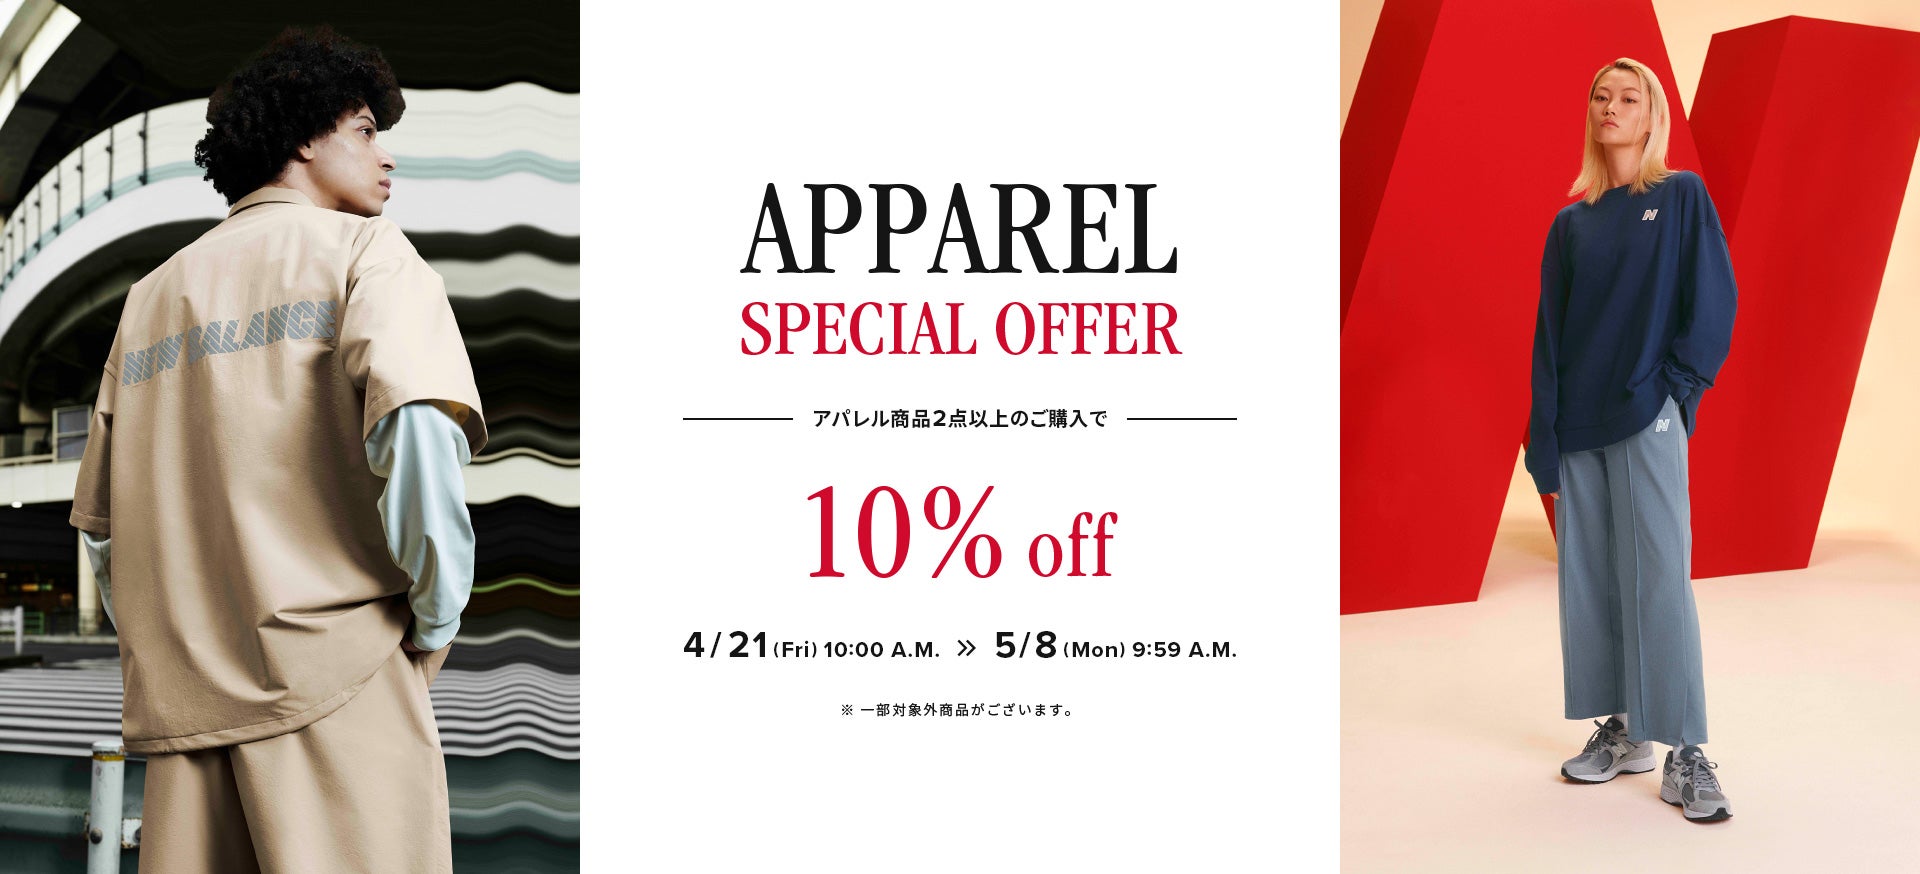 APPAREL SPECIAL OFFER@2_10%OFF